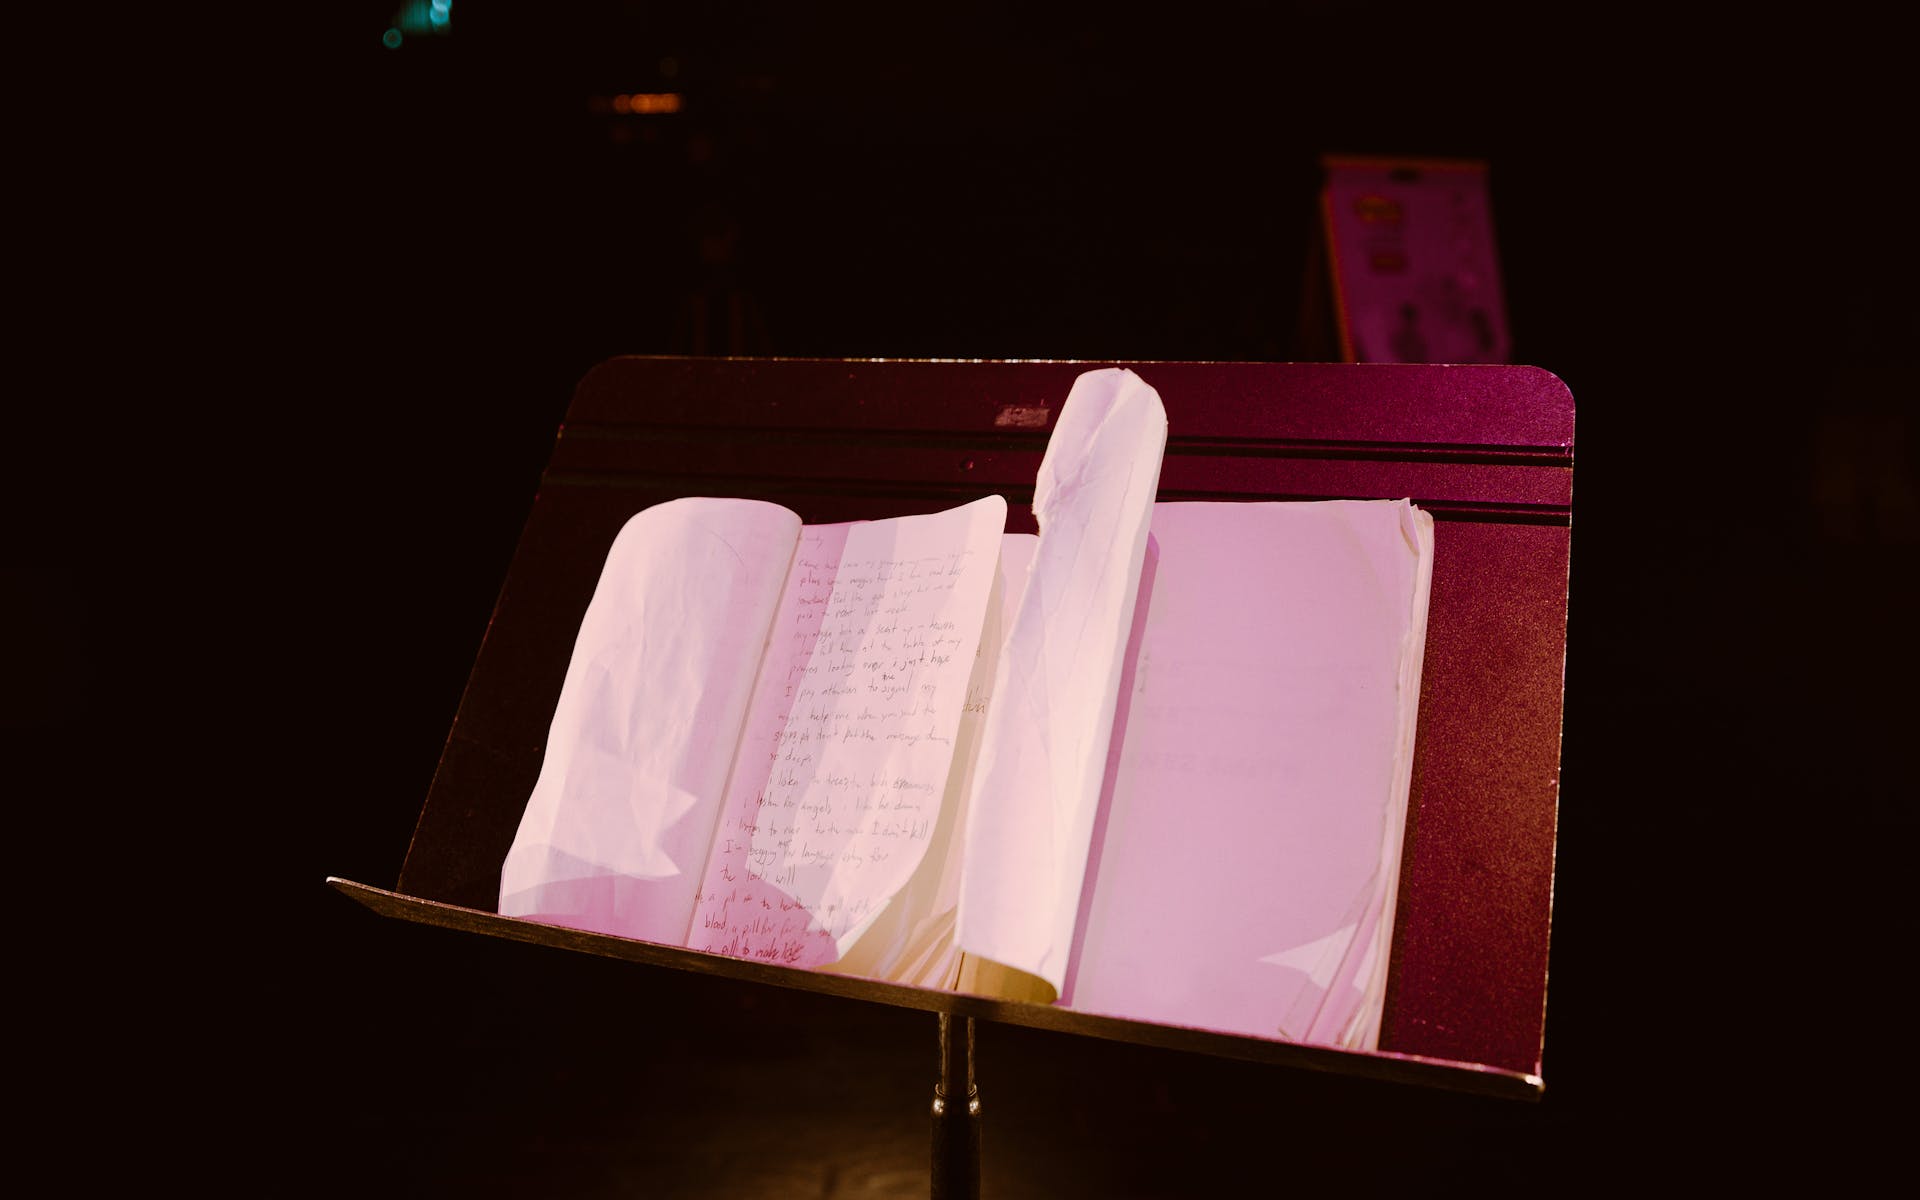 Notes in a book sit on a music stand